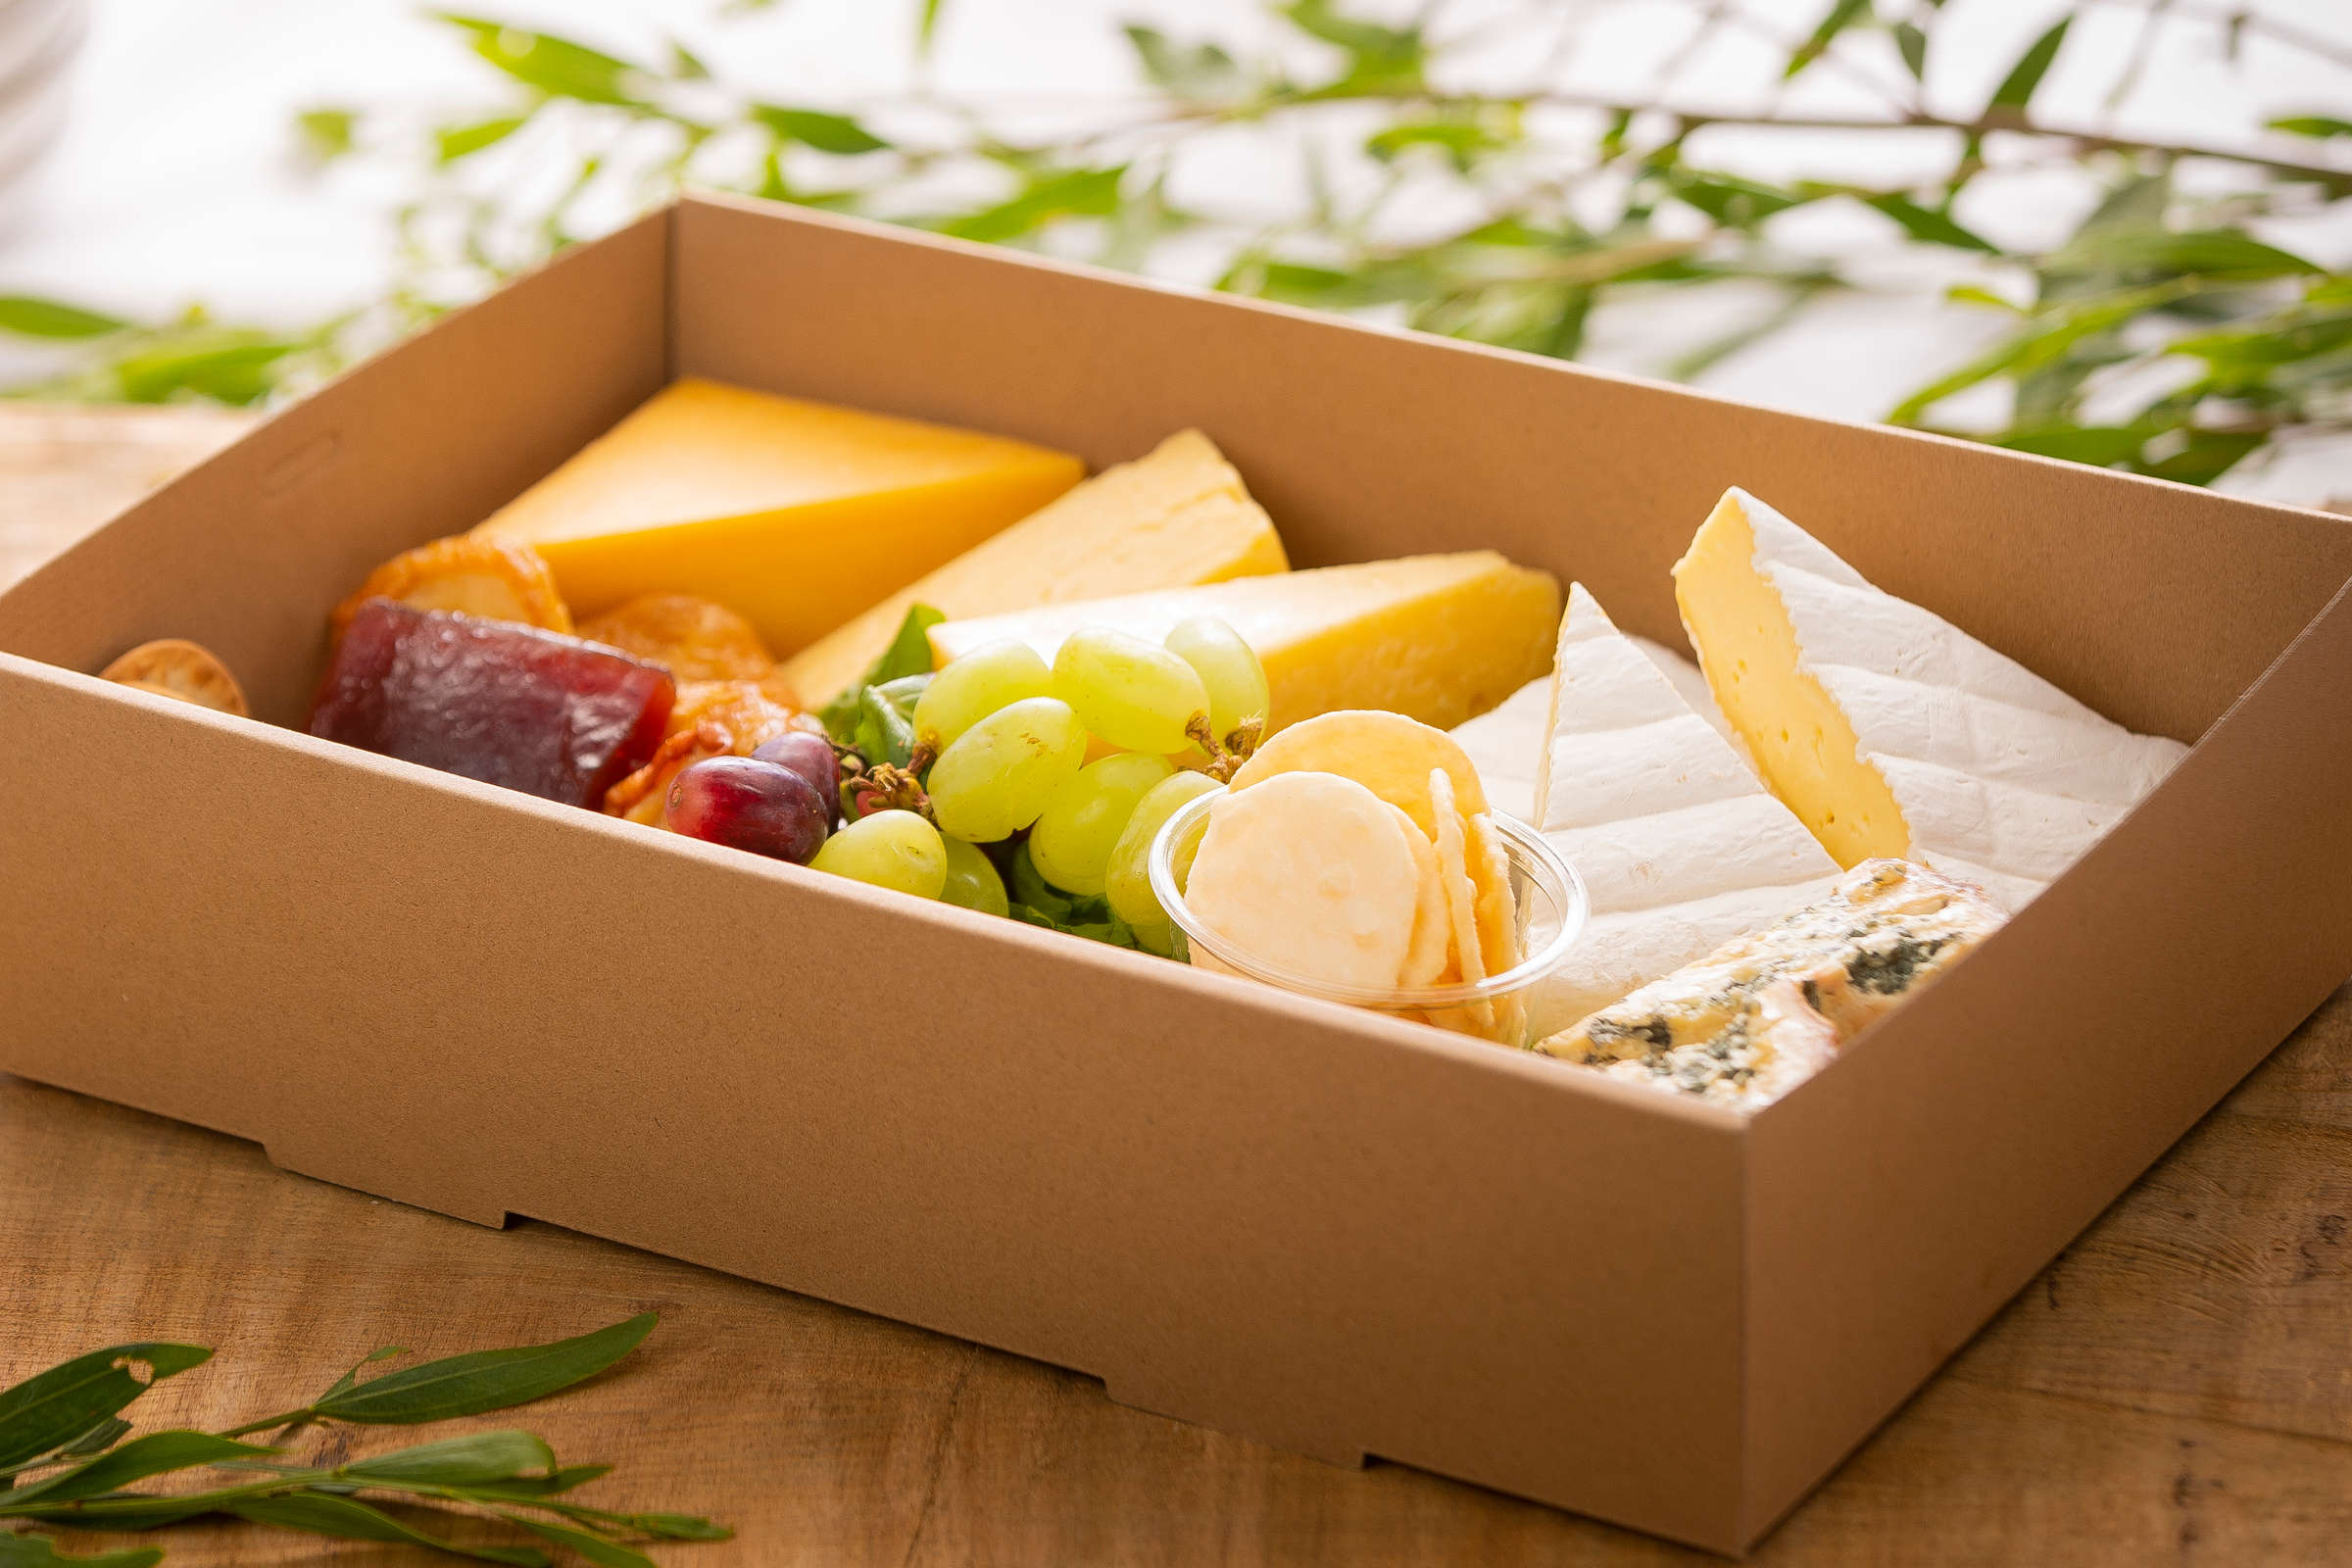 Tasmanian cheese box including brie, Blue and Cheddar with quince paste and crackers. Credit: Richard Jupe.